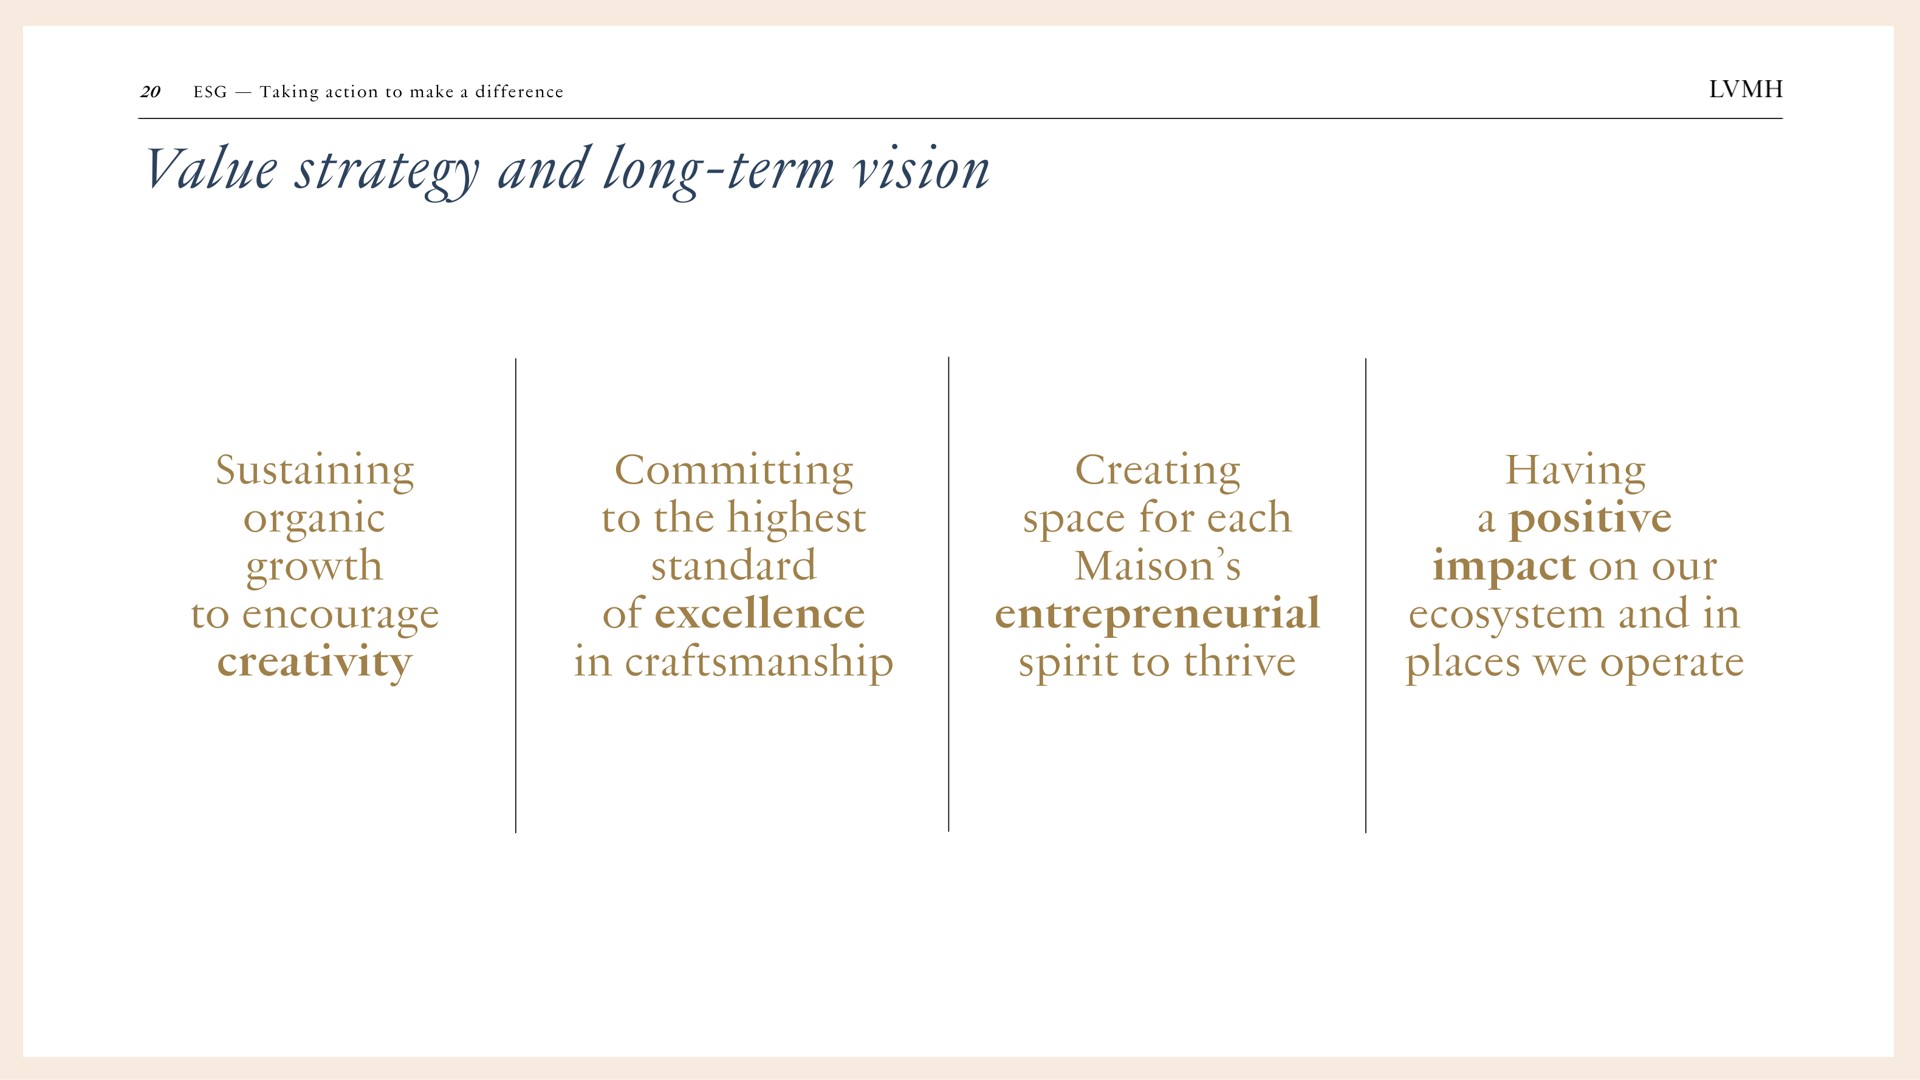 value strategy and long term vision sustaining organic growth to encourage creativity committing to the highest standard of excellence in craftsmanship creating space for each entrepreneurial spirit to thrive having a positive impact on our ecosystem and in places we operate | LVMH